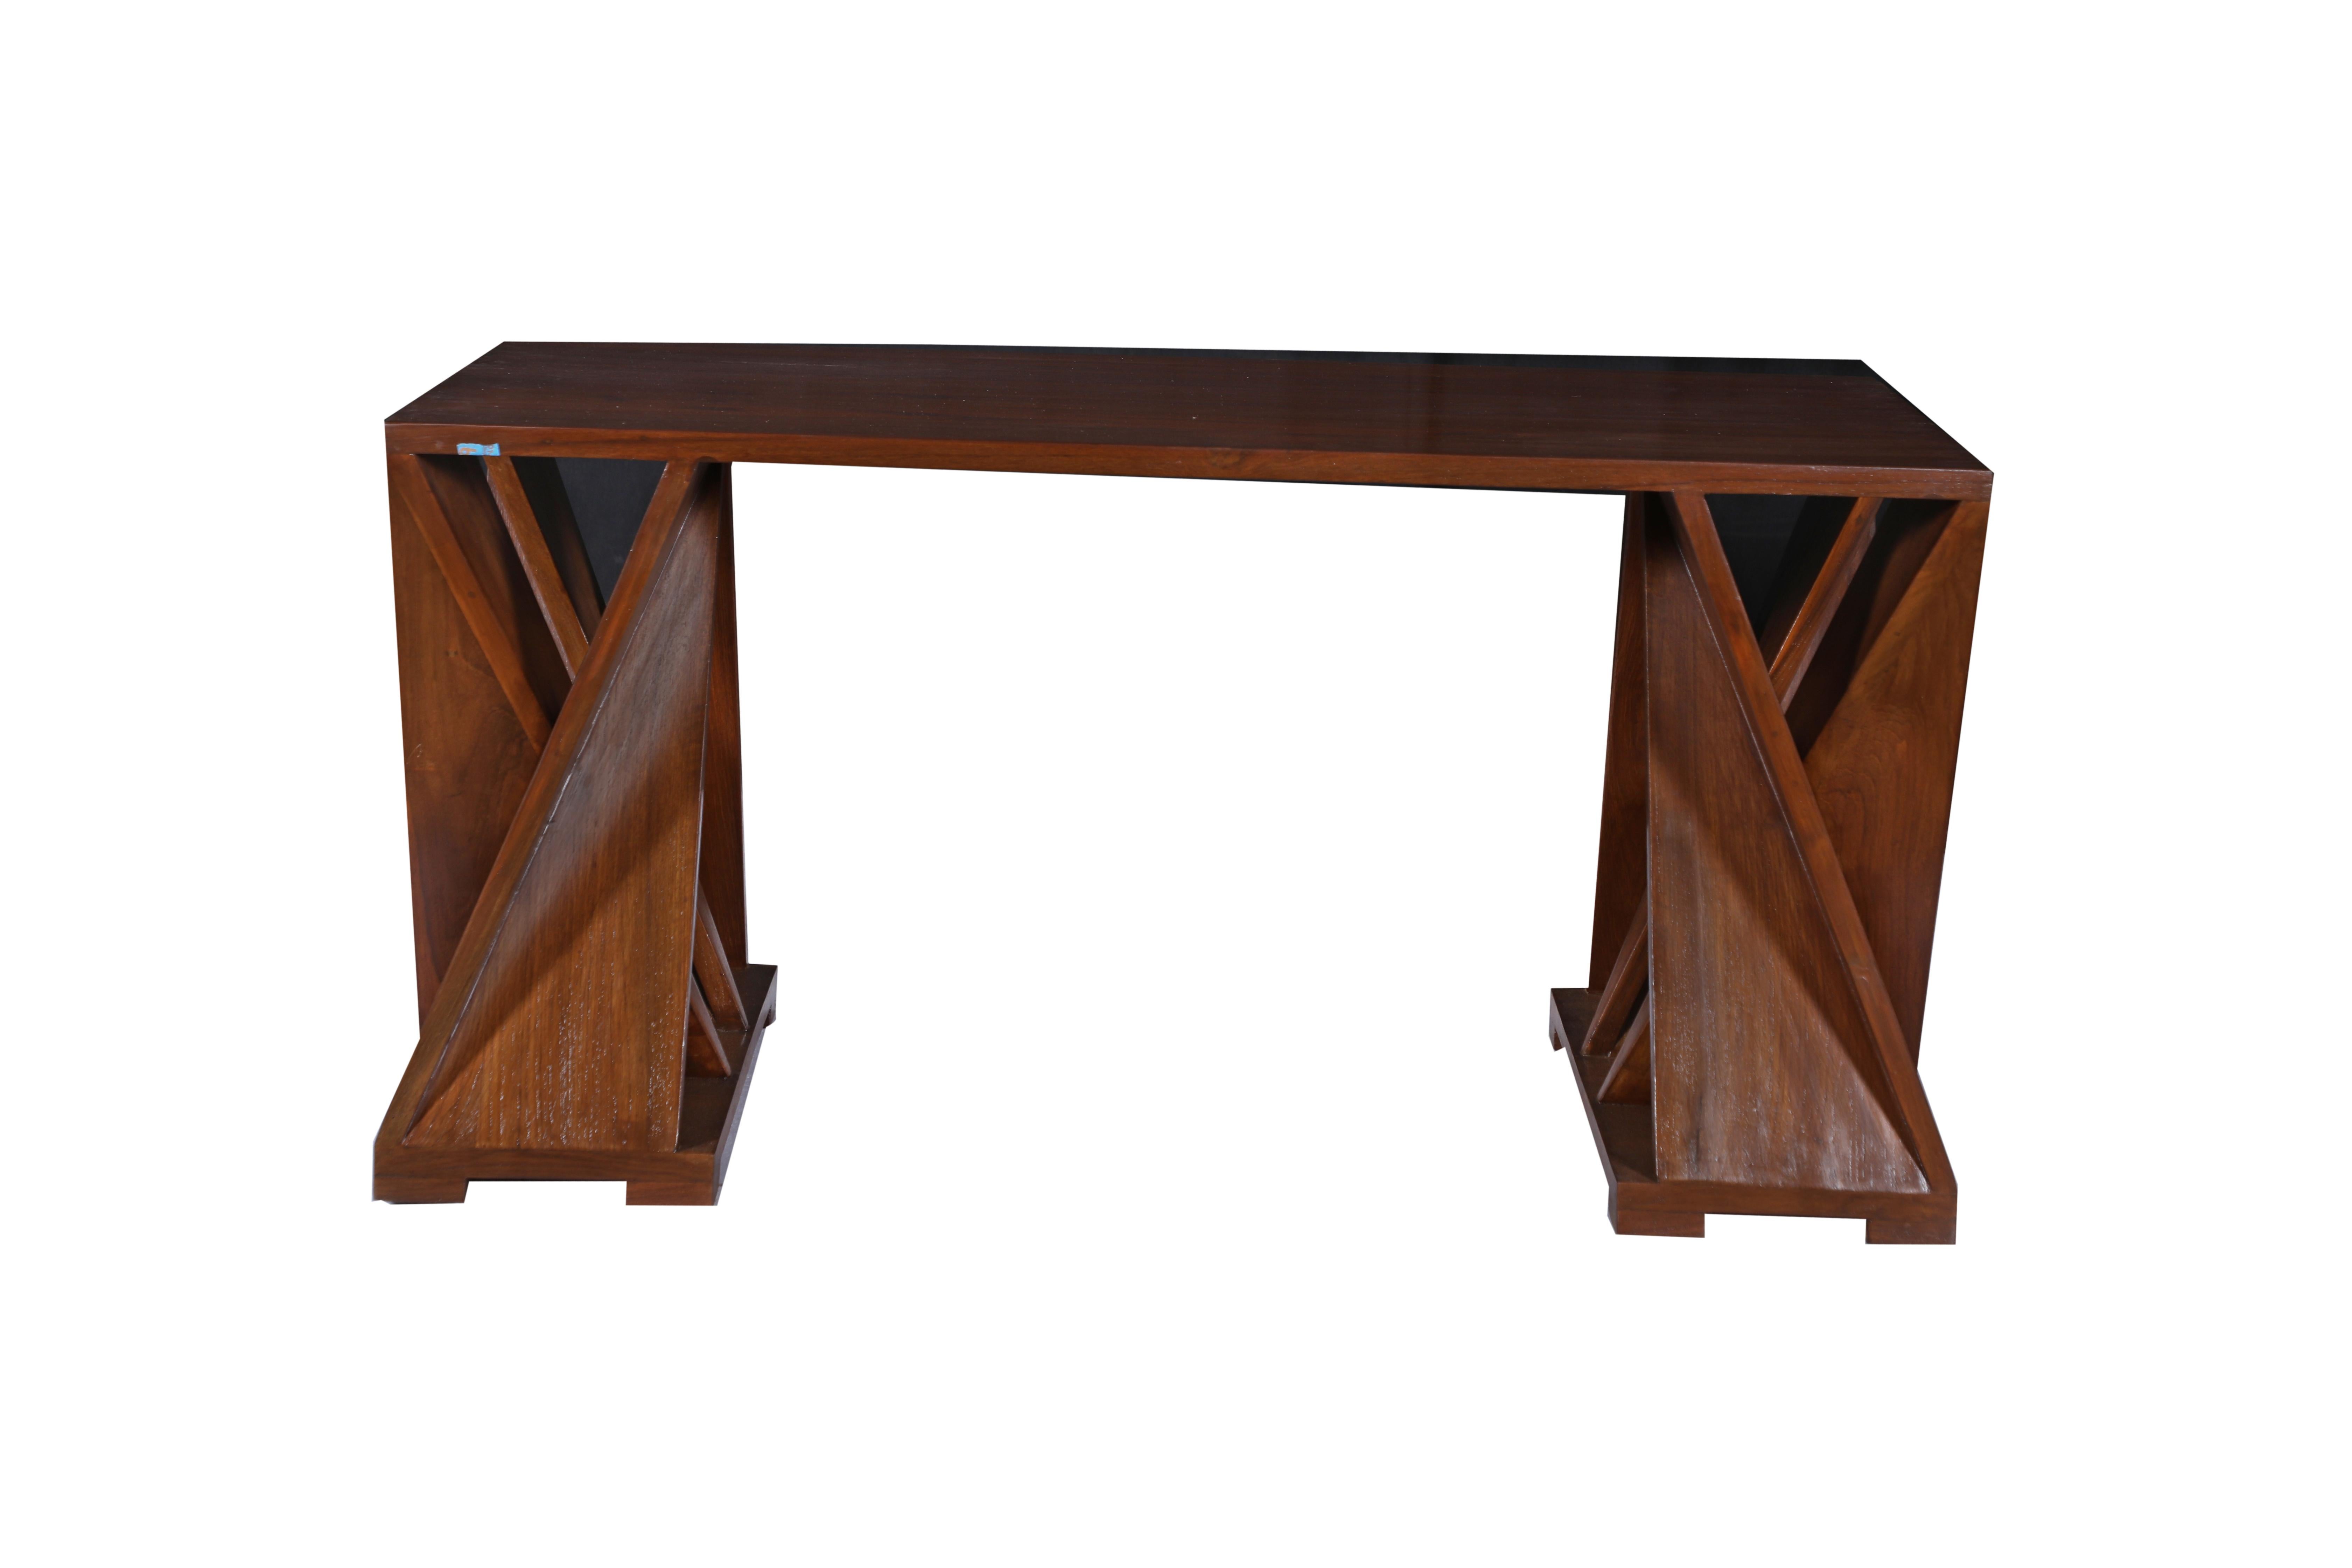 A teak coffee table or bench with intricate twisted and angled supports as the table legs. It has an architectural aesthetic with dimension and interest. Use as a sofa coffee table or a bench. 21st century.